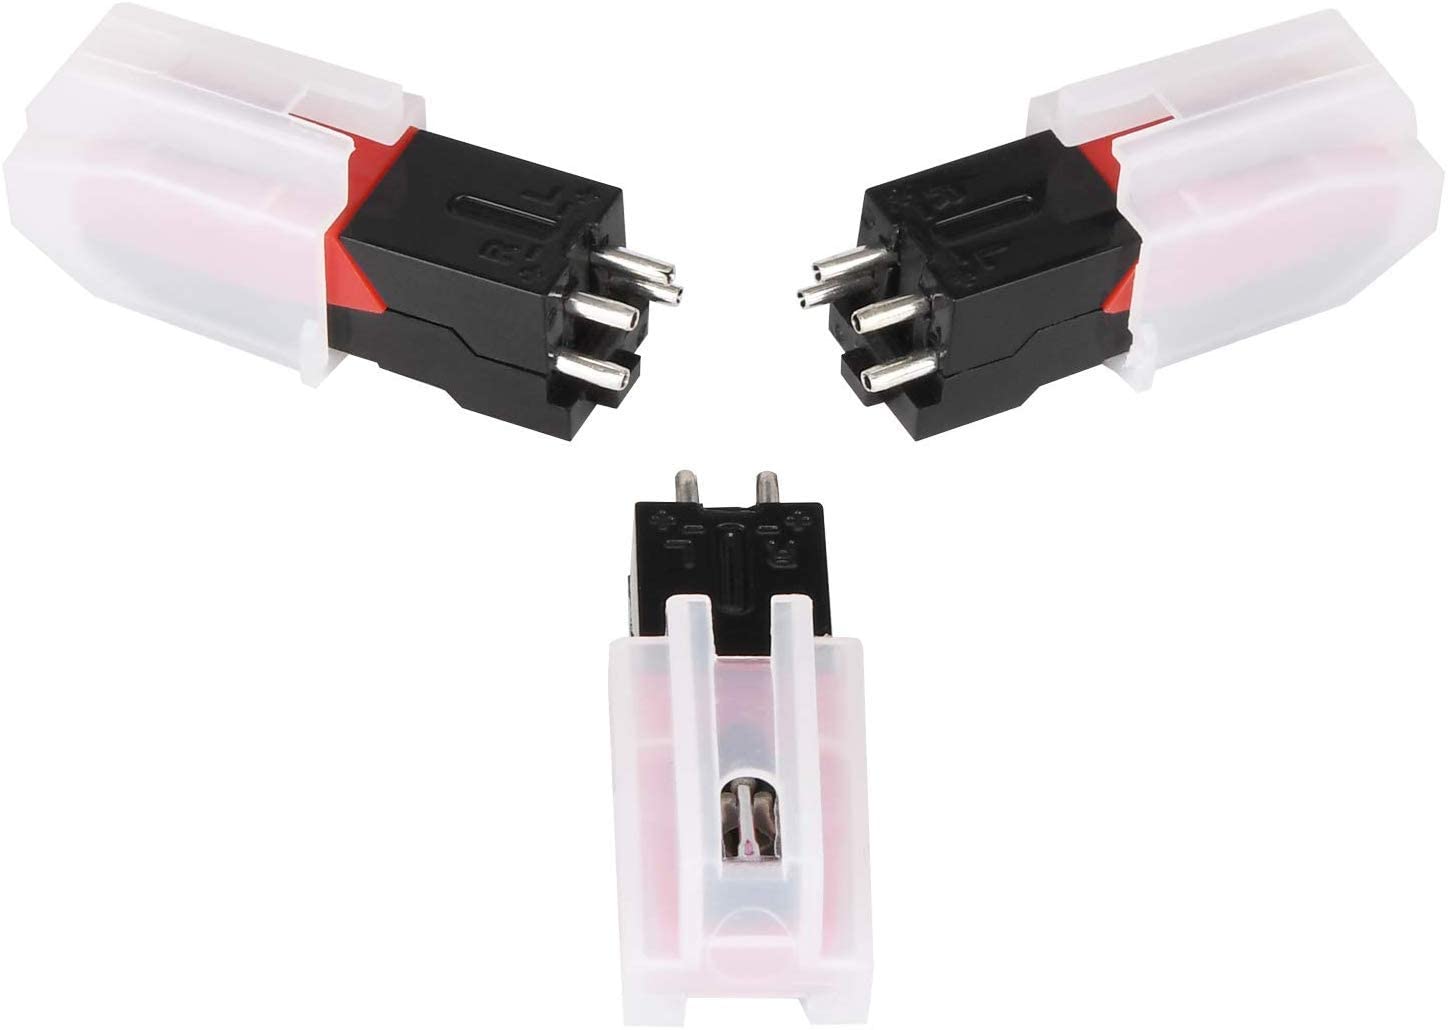 DIGITNOW! Vinyl Turntable Cartridge with Needle Stylus for Vintage LP for Record Player - 3 Pack